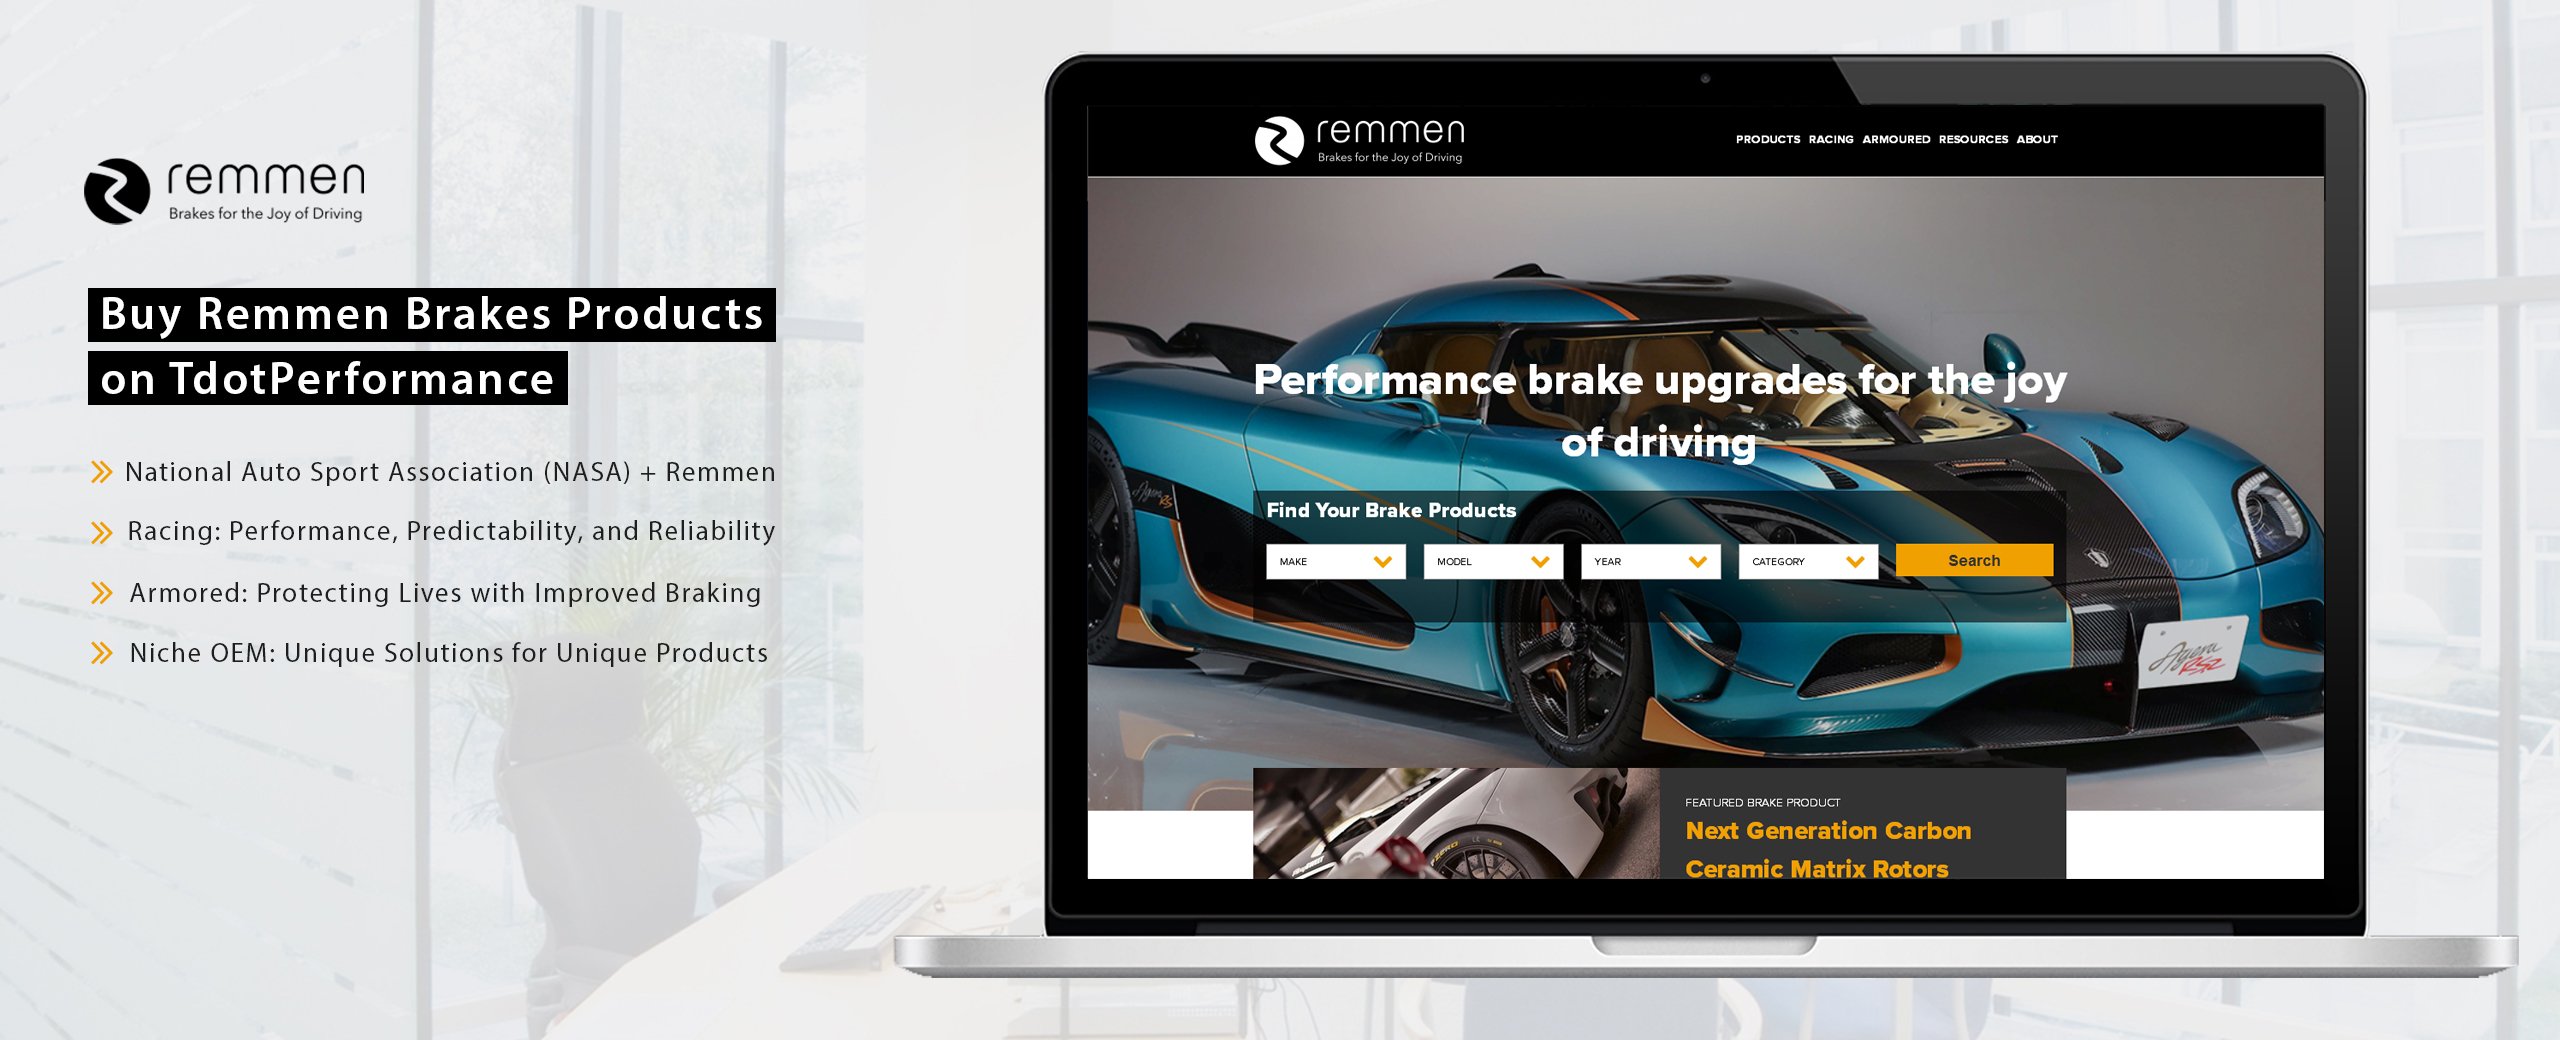 The Braking Solution agency opted for WordPress web development services from us for WordPress theme customization and website optimization.